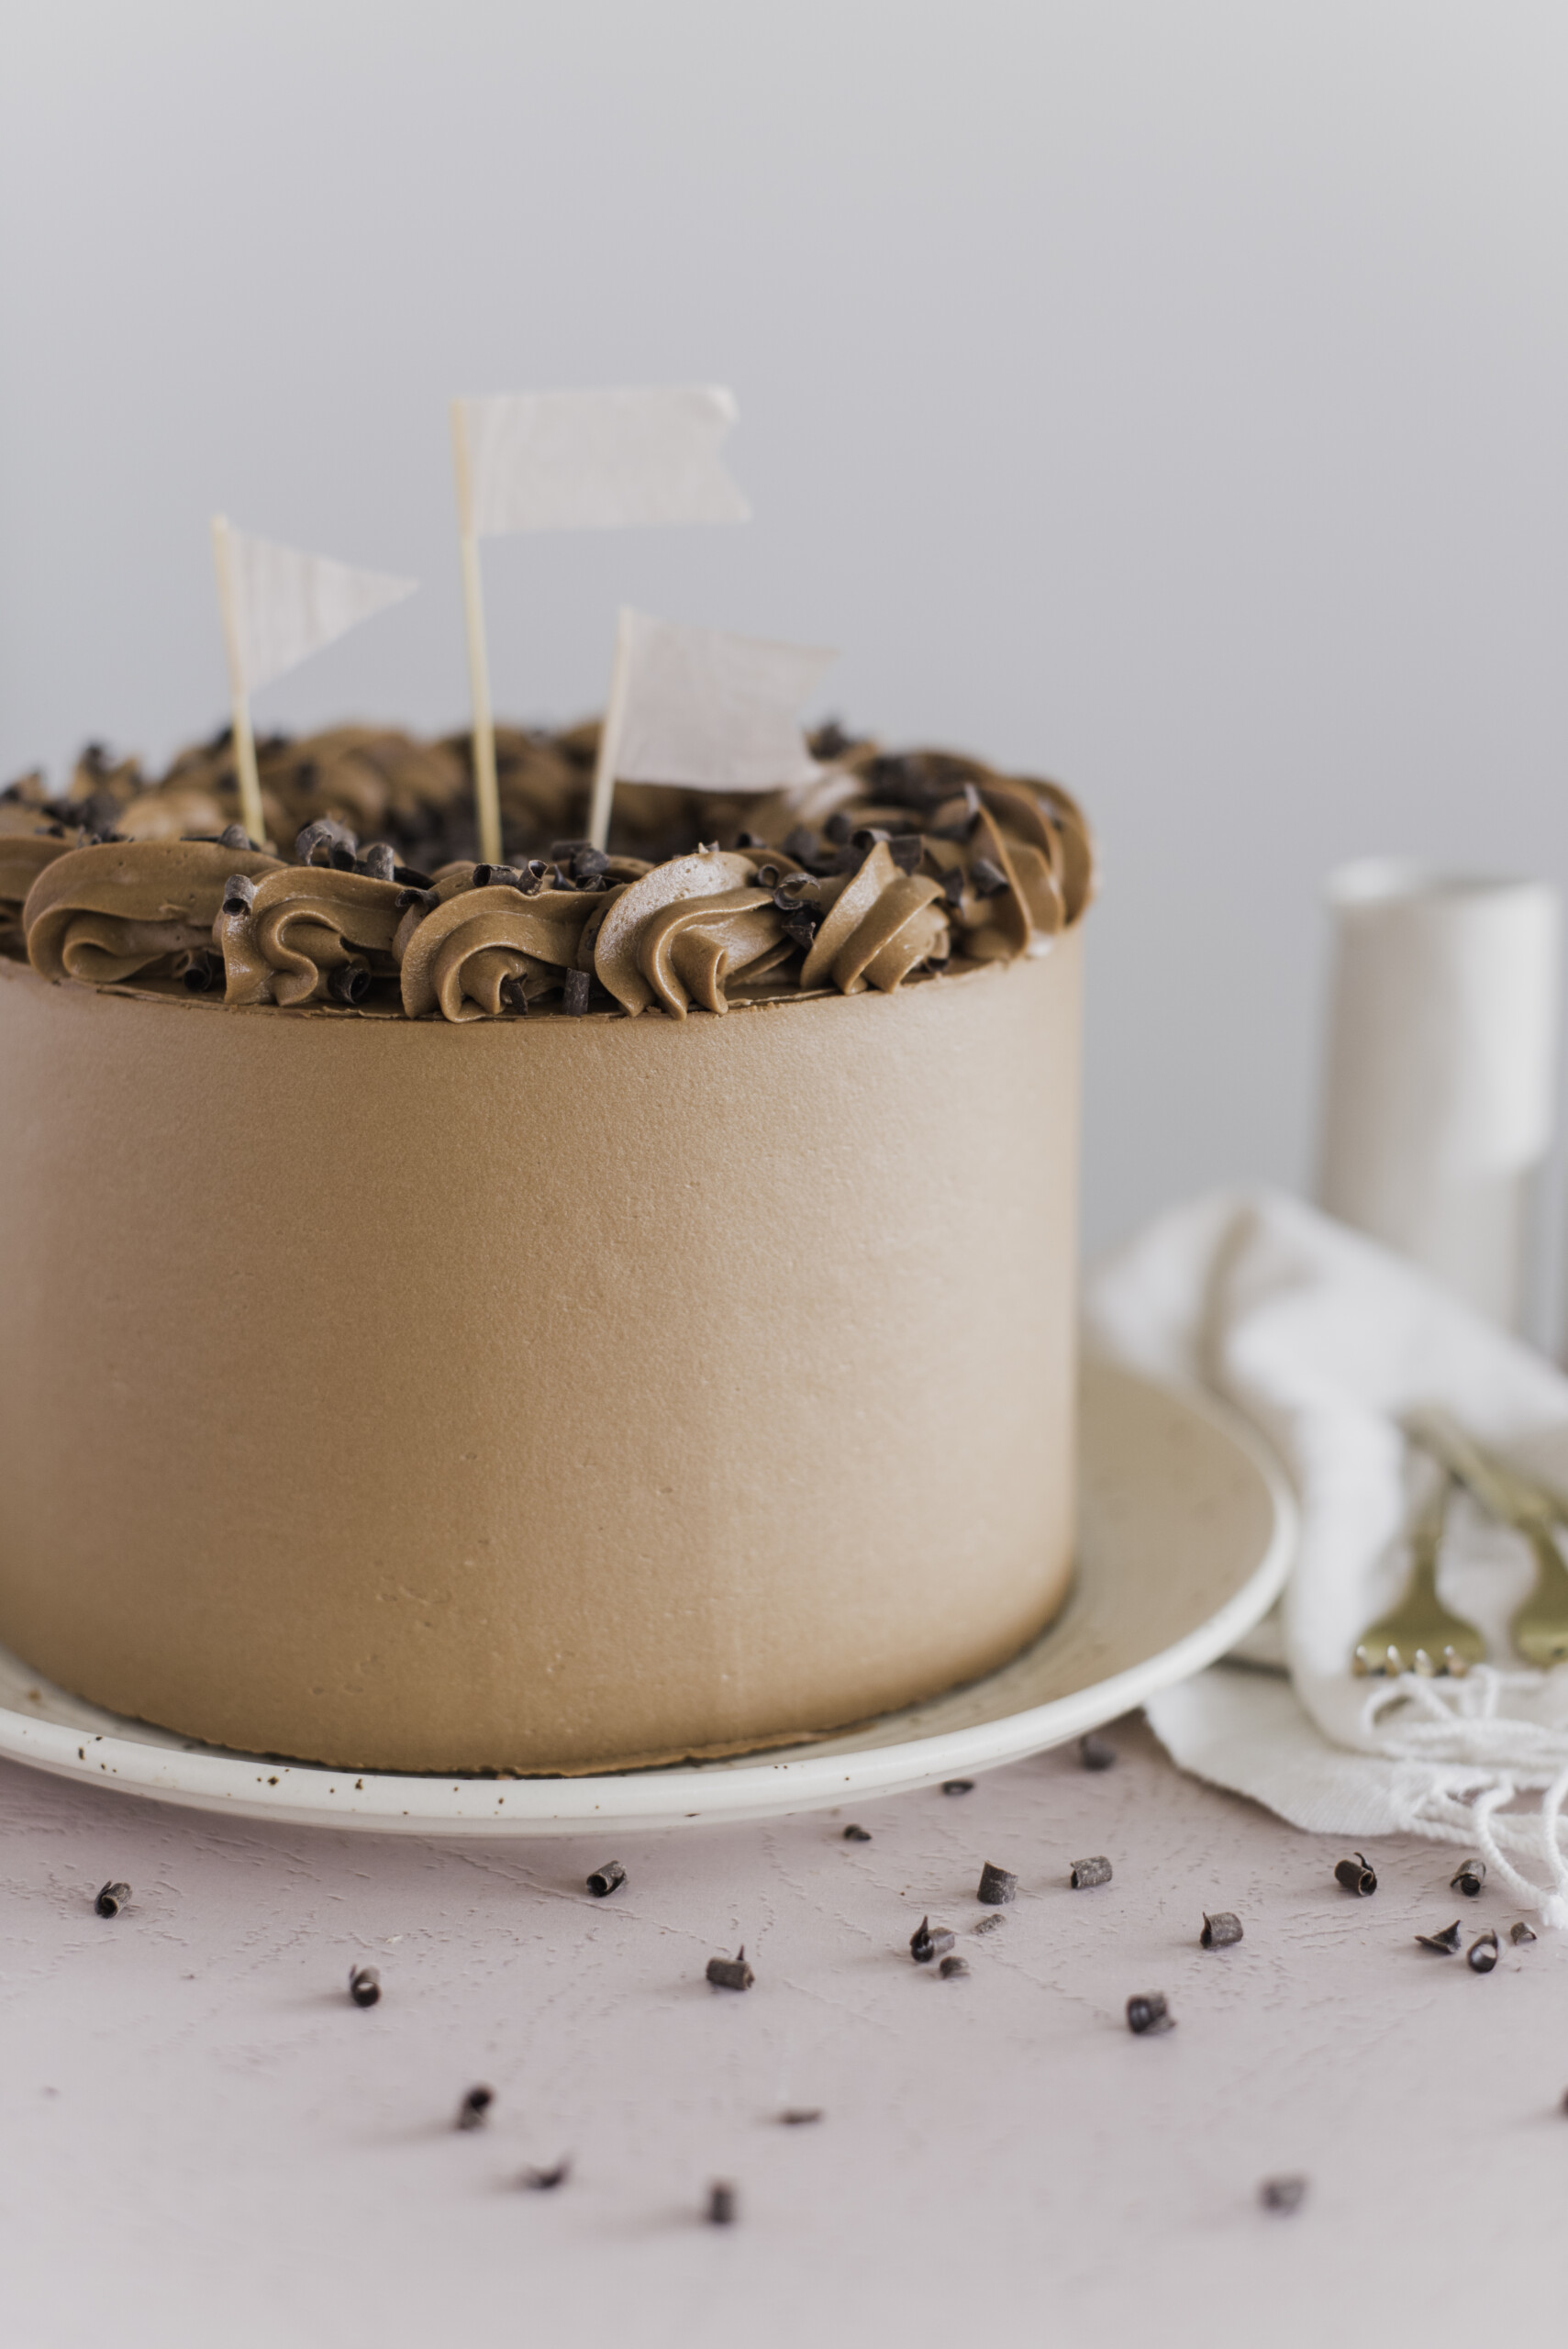 Classic Yellow Cake with Chocolate Buttercream - Cake by Courtney